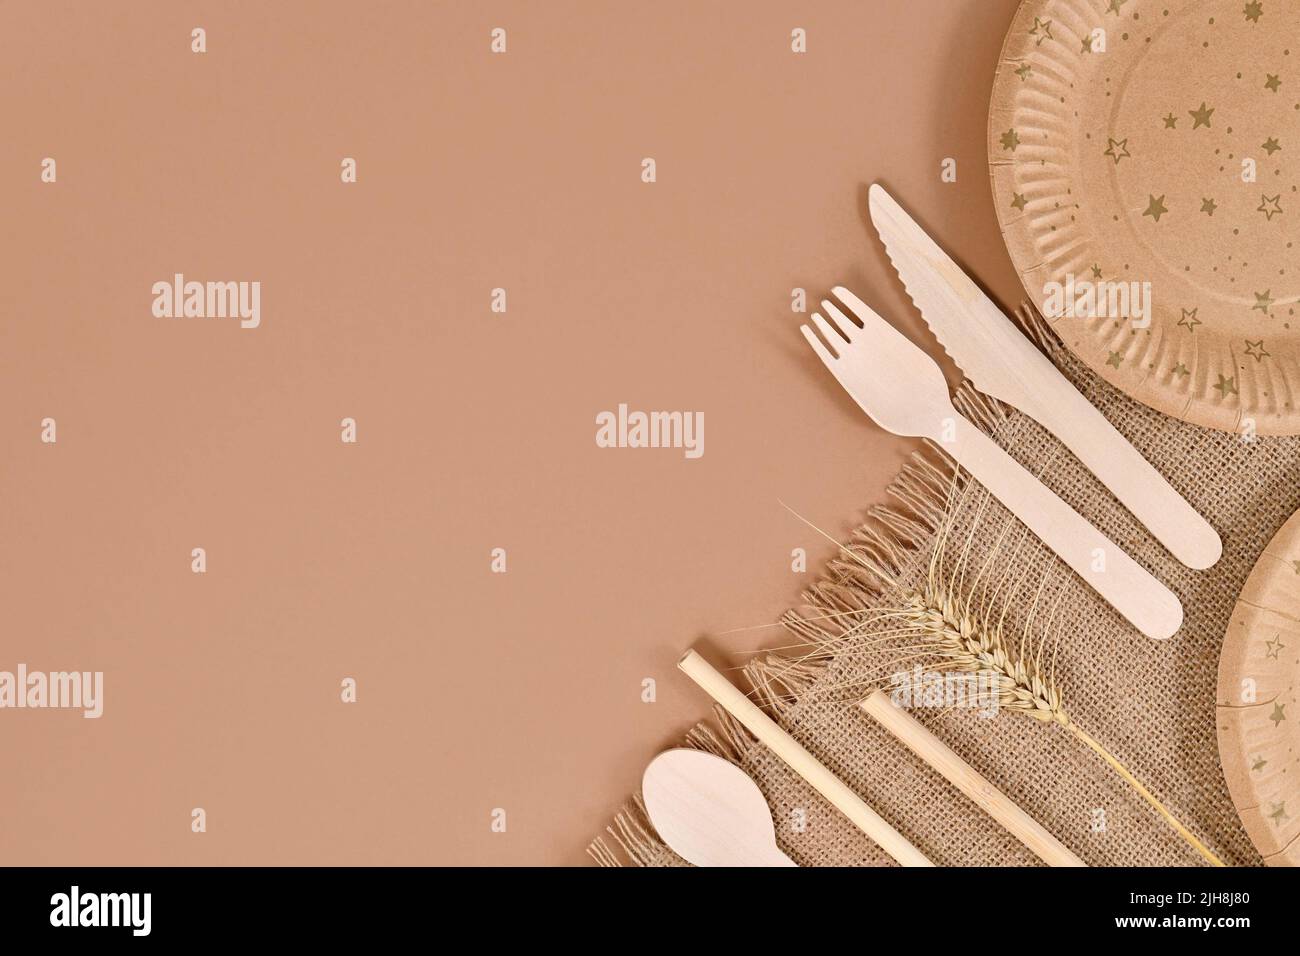 Eco friendly paper party plates and wooden cutlery in corner of beige background with copy space Stock Photo